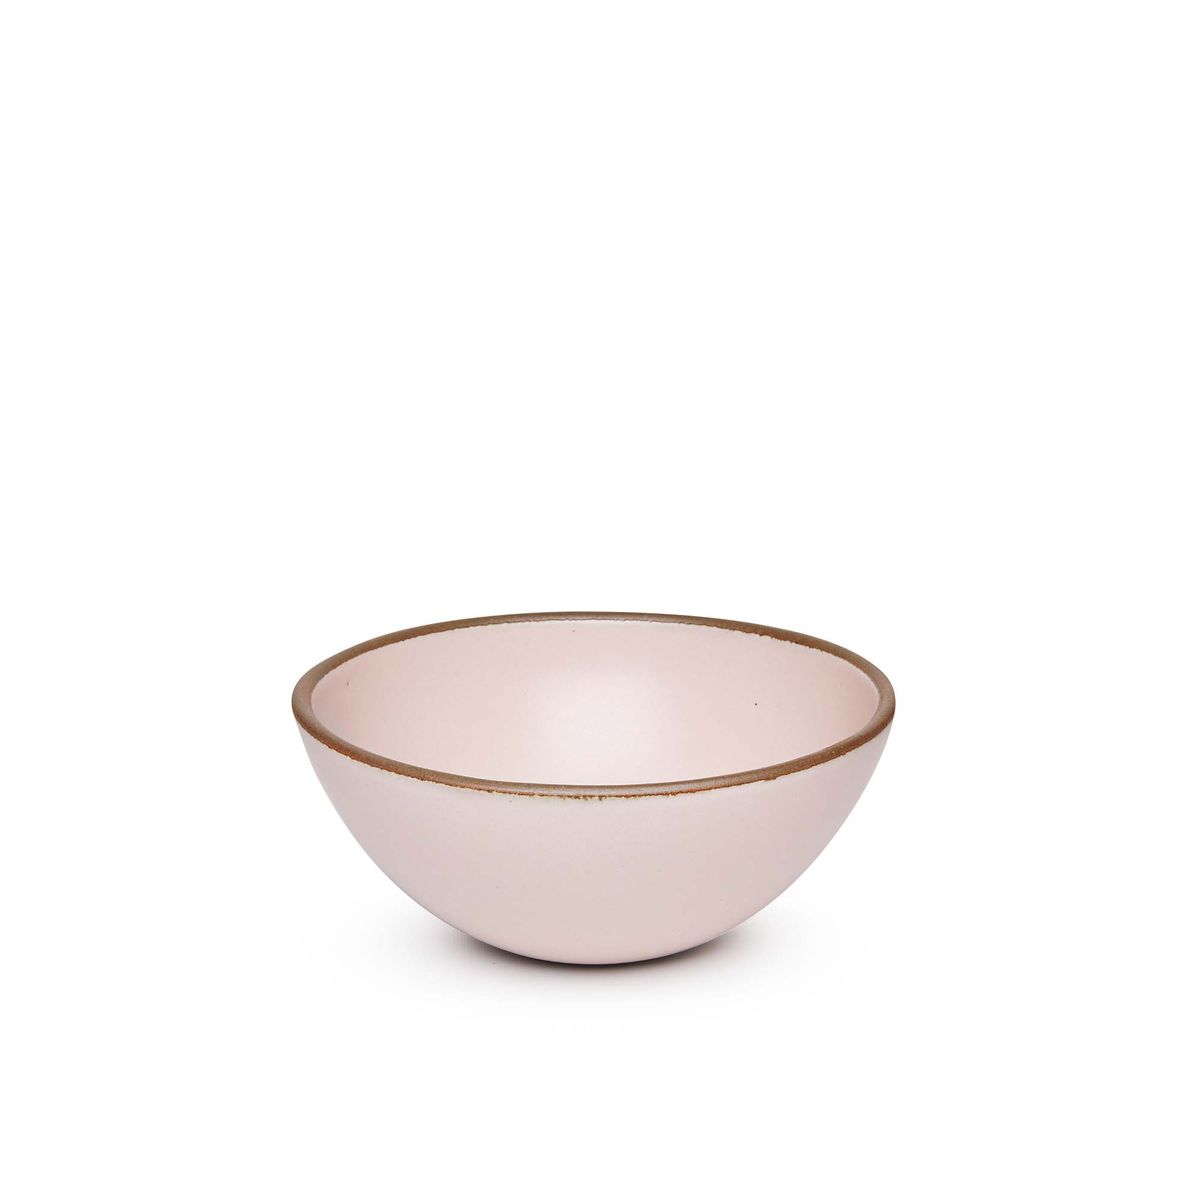 A medium rounded ceramic bowl in a soft light pink color featuring iron speckles and an unglazed rim